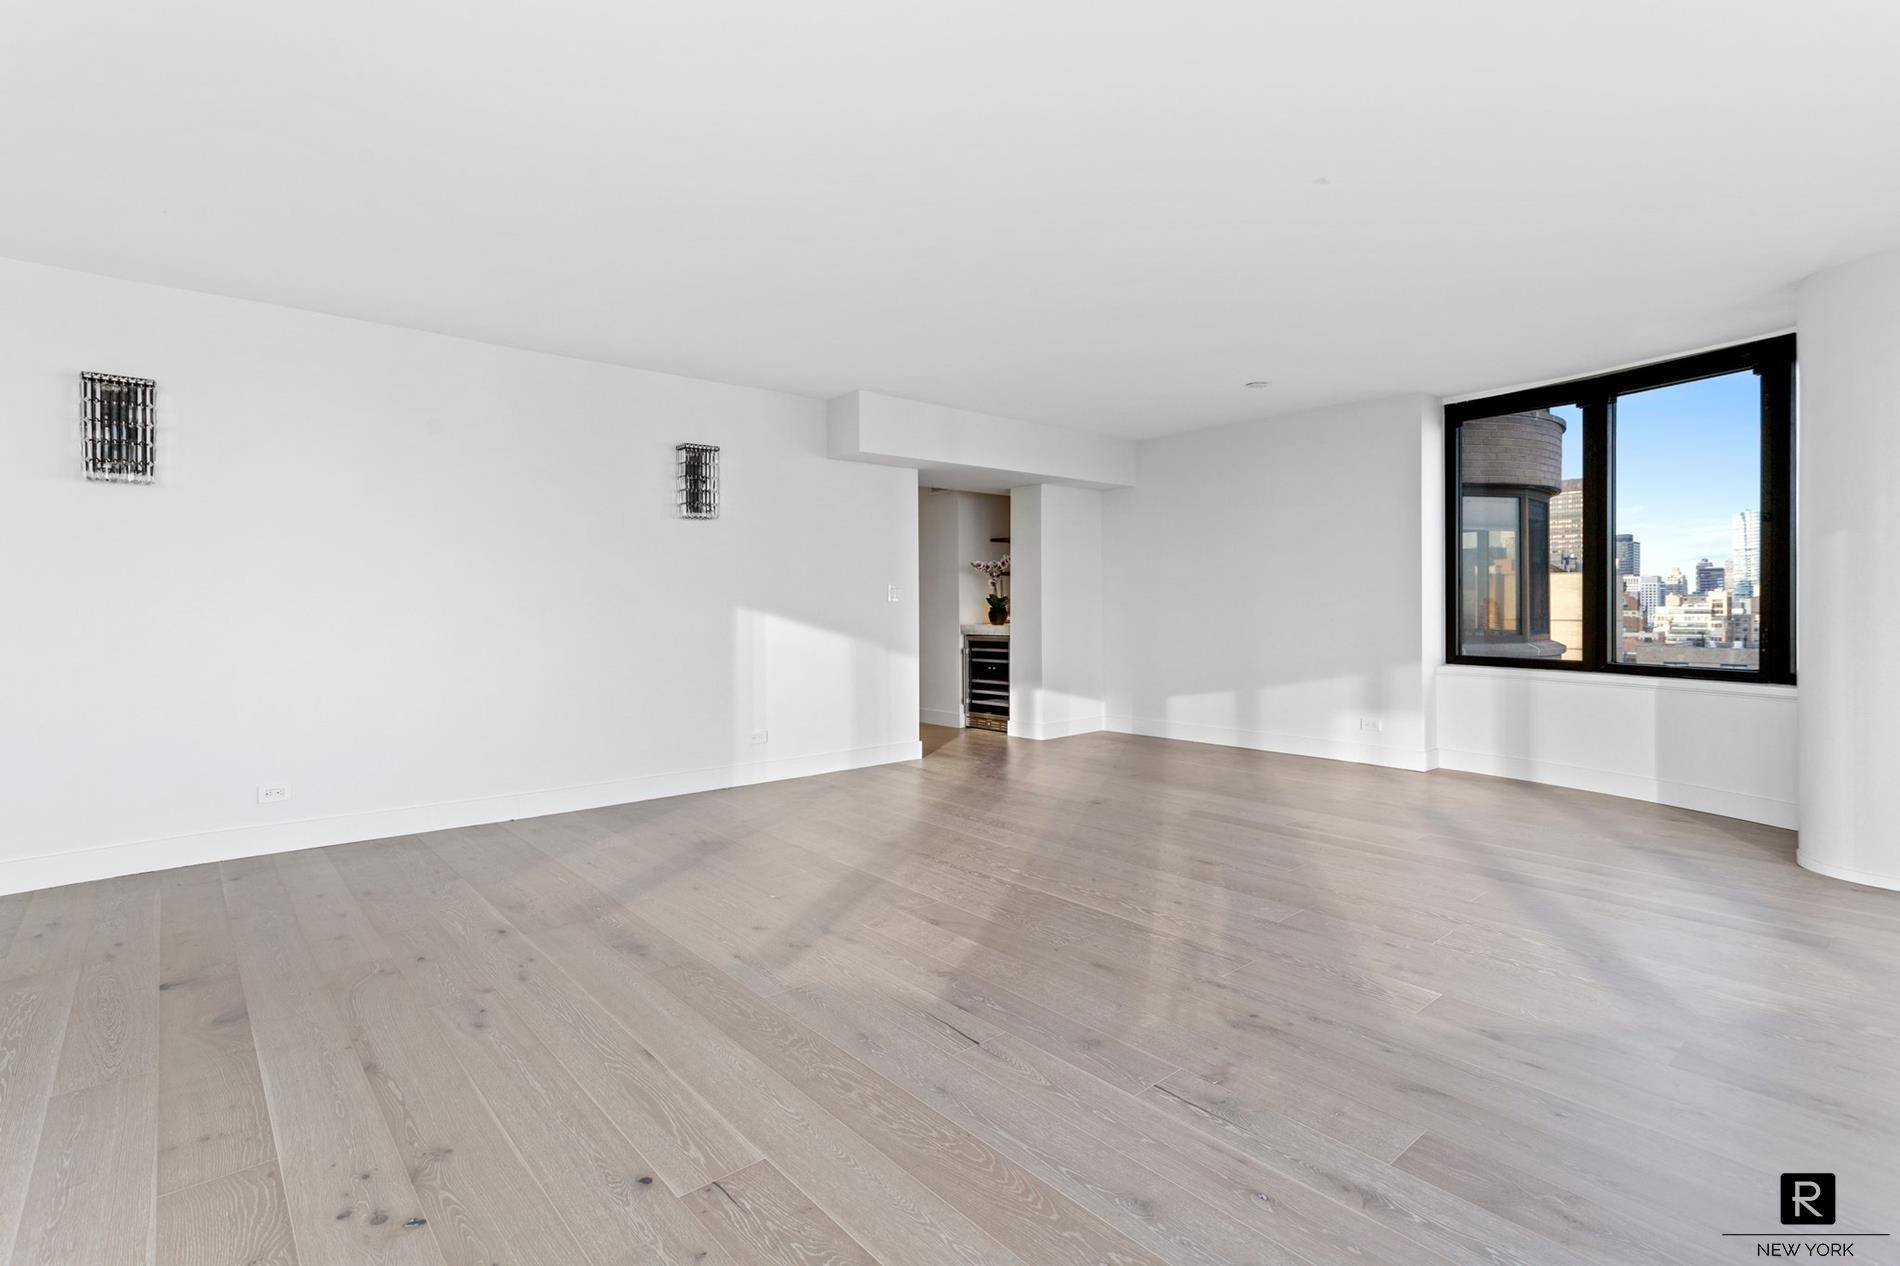 The best fully renovated unit in the building with spectacular views of east river and looking south of the city.